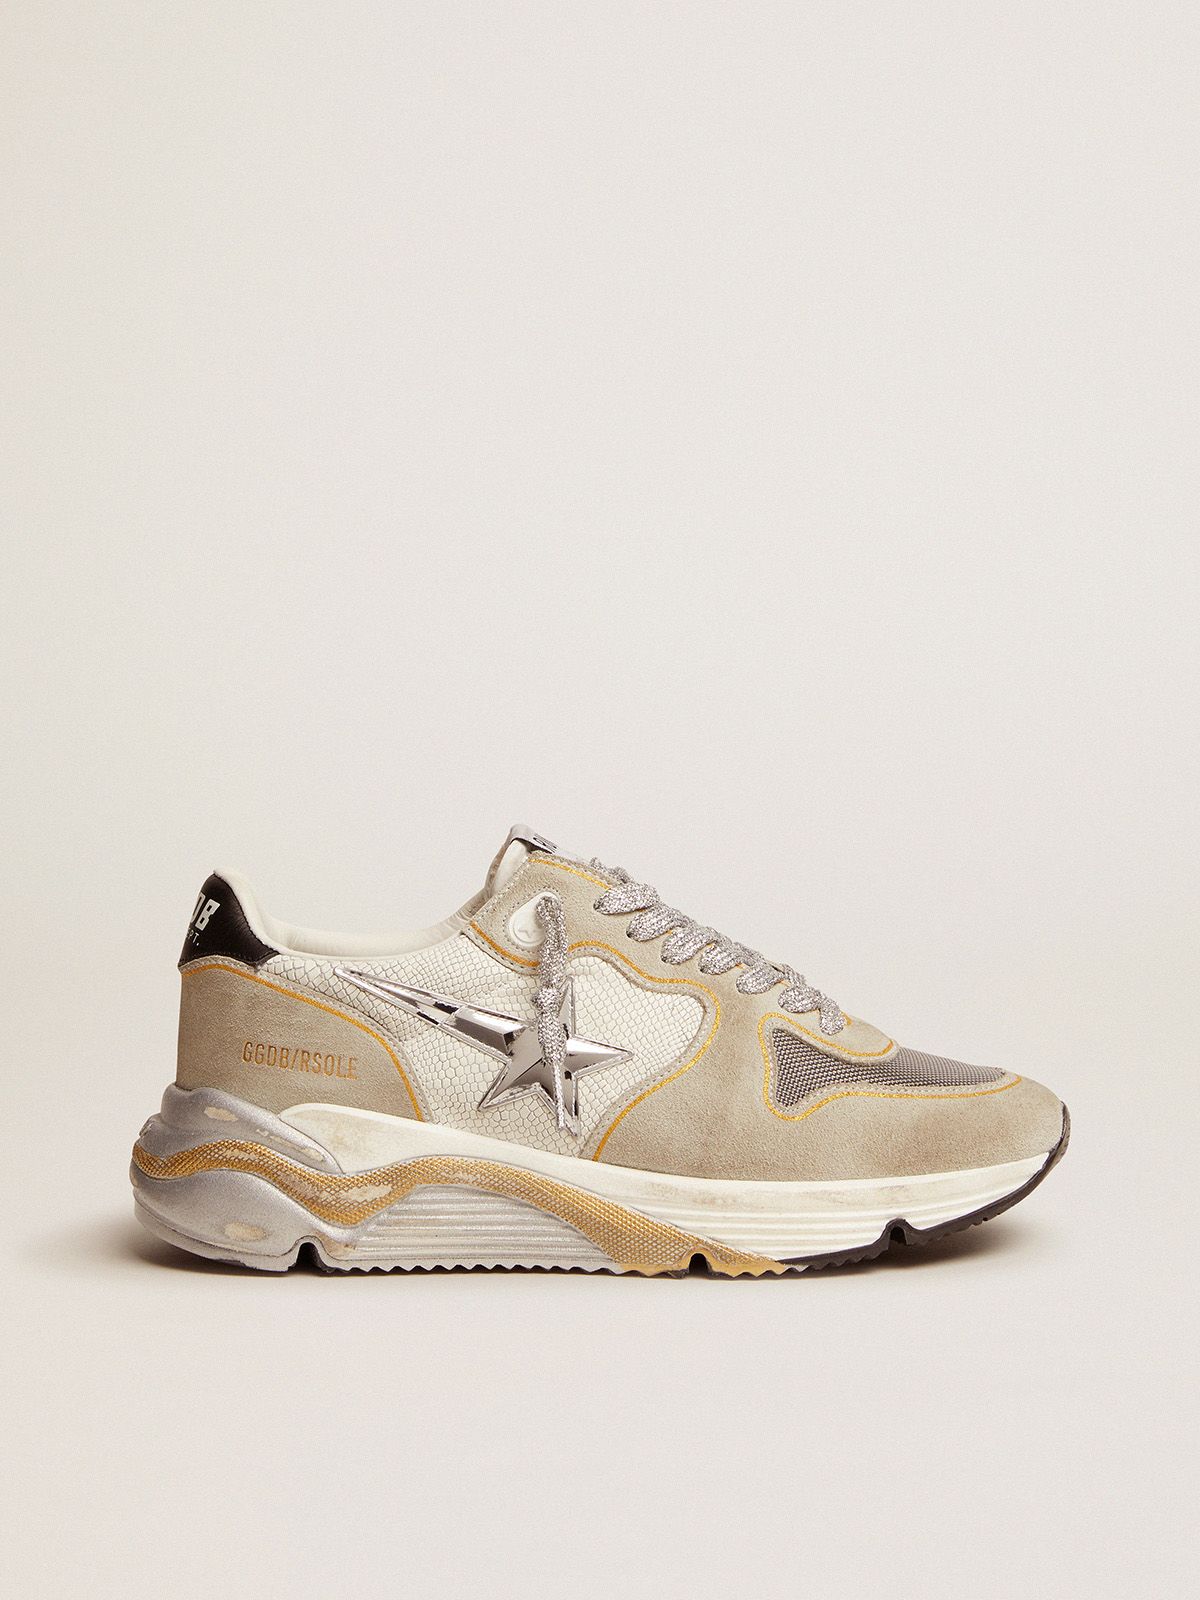 golden goose in suede white snake-print leather mesh Running sneakers with and Sole LTD insert